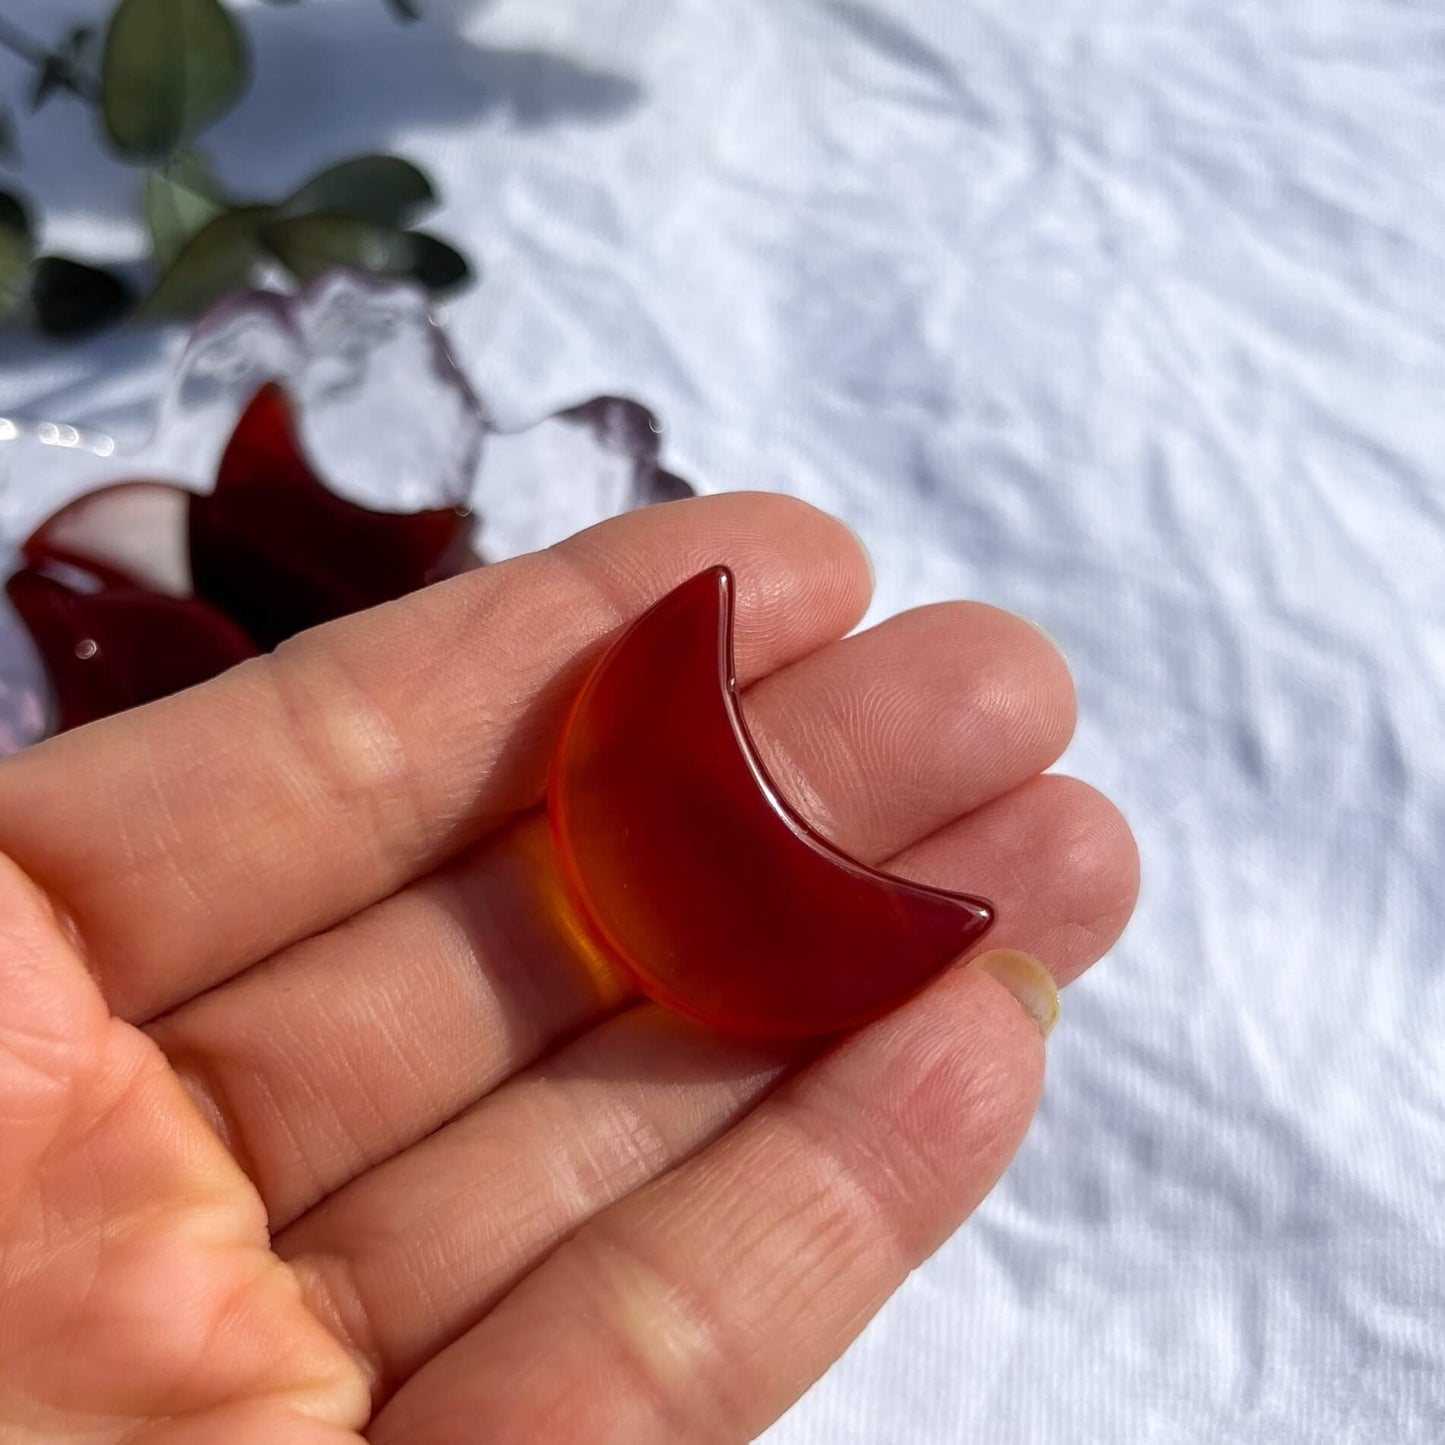 A small red carnelian crystal moon shown in an open hand